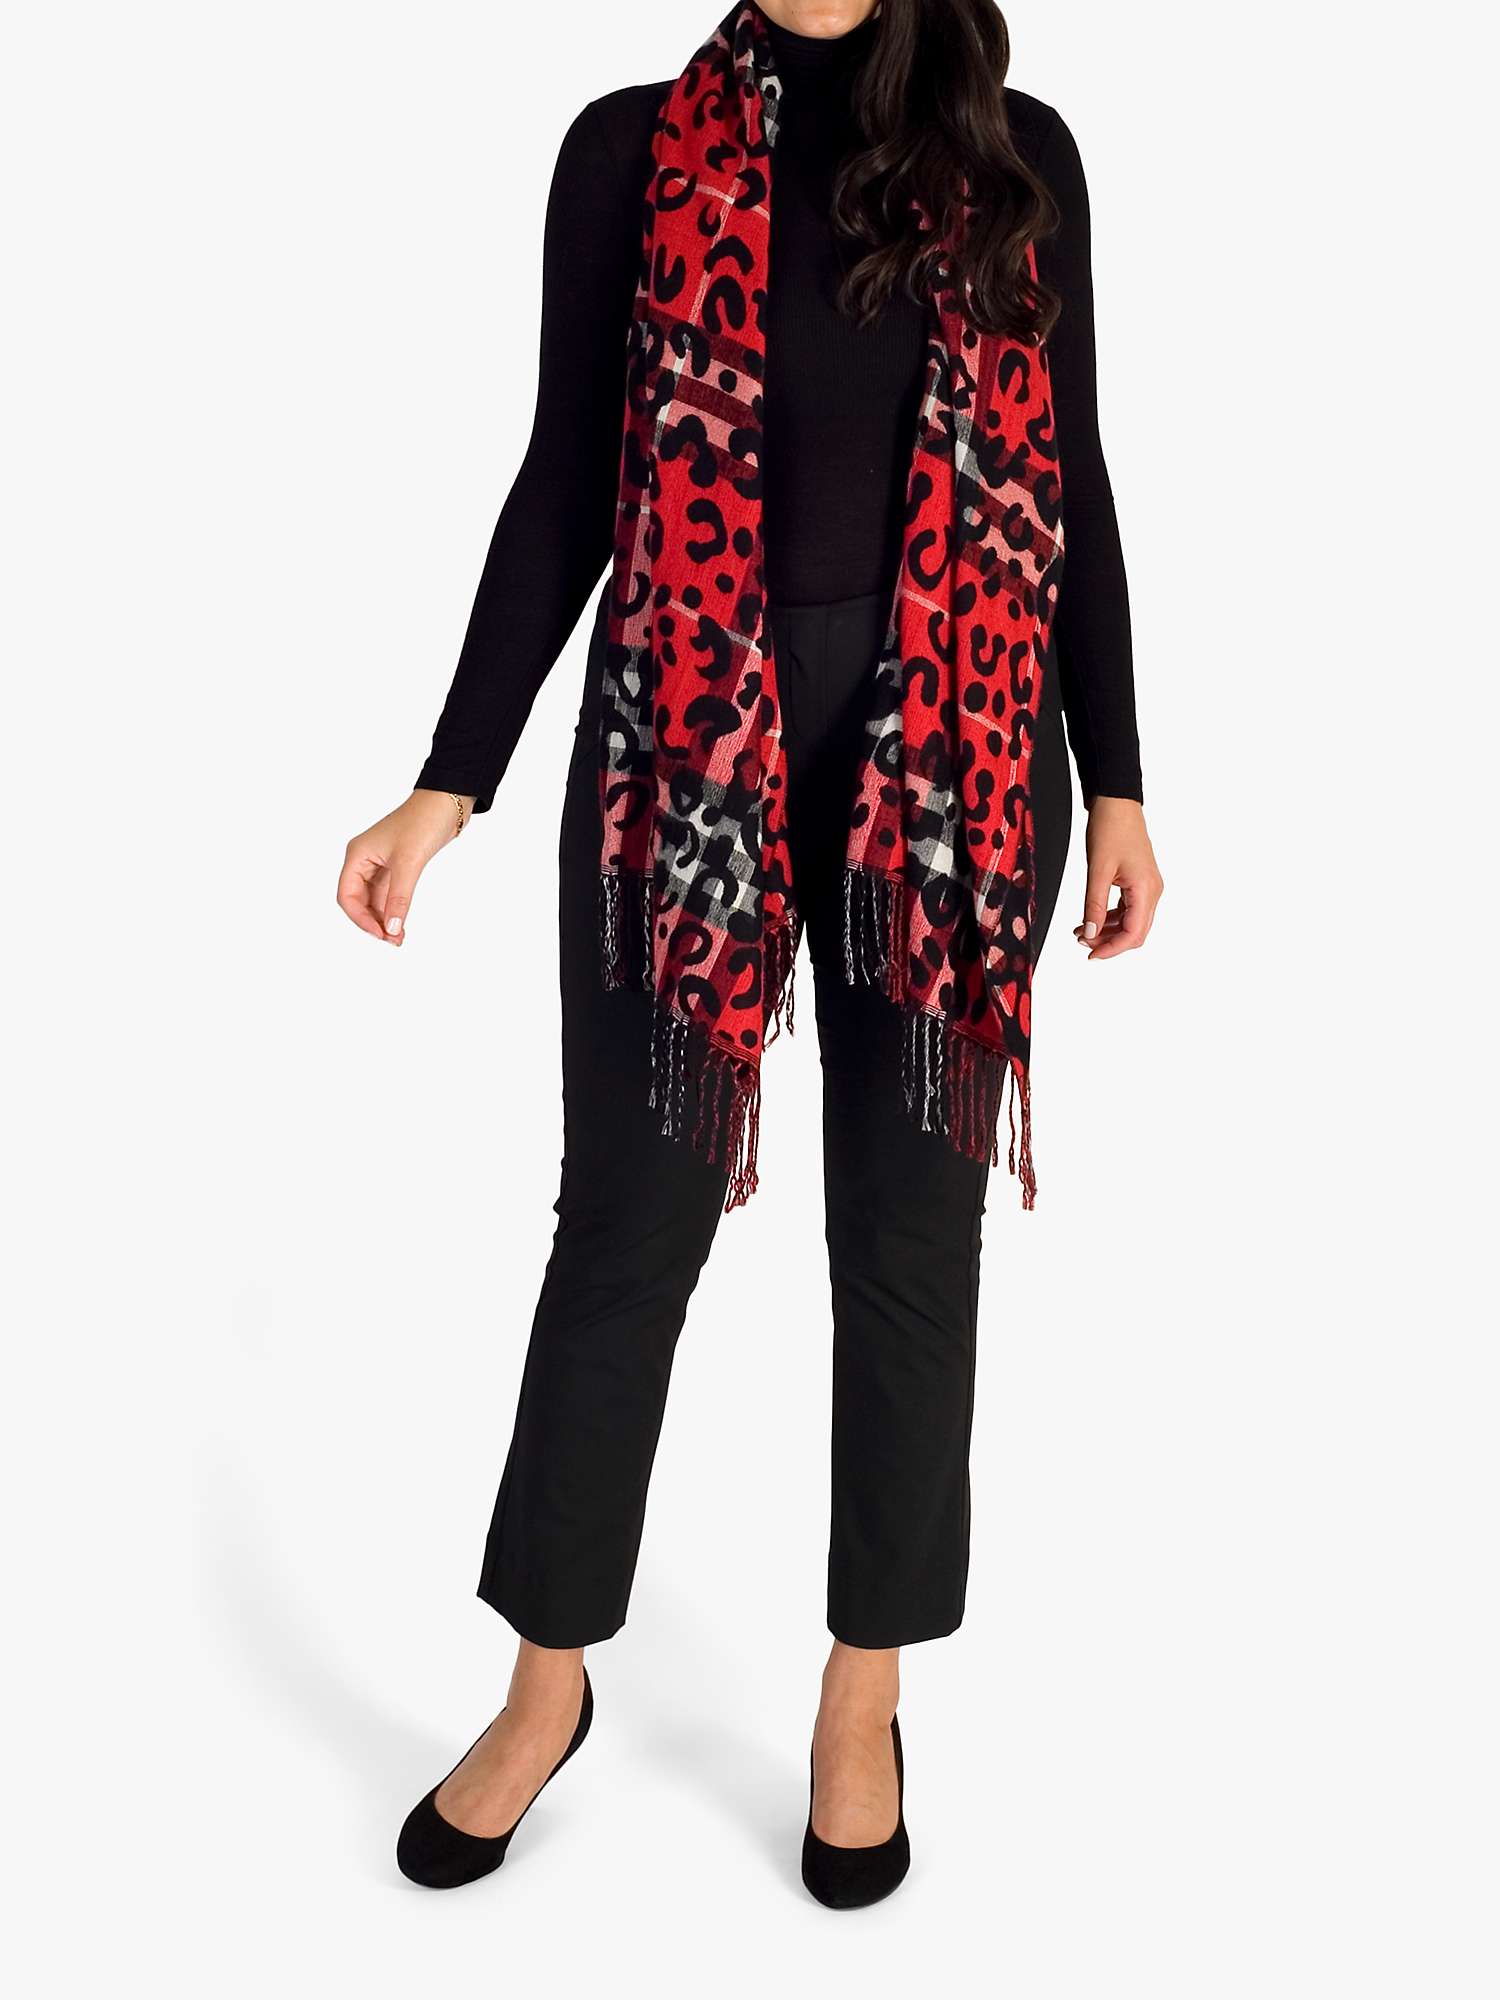 Buy chesca Animal and Check Print Scarf, Red/Black Online at johnlewis.com